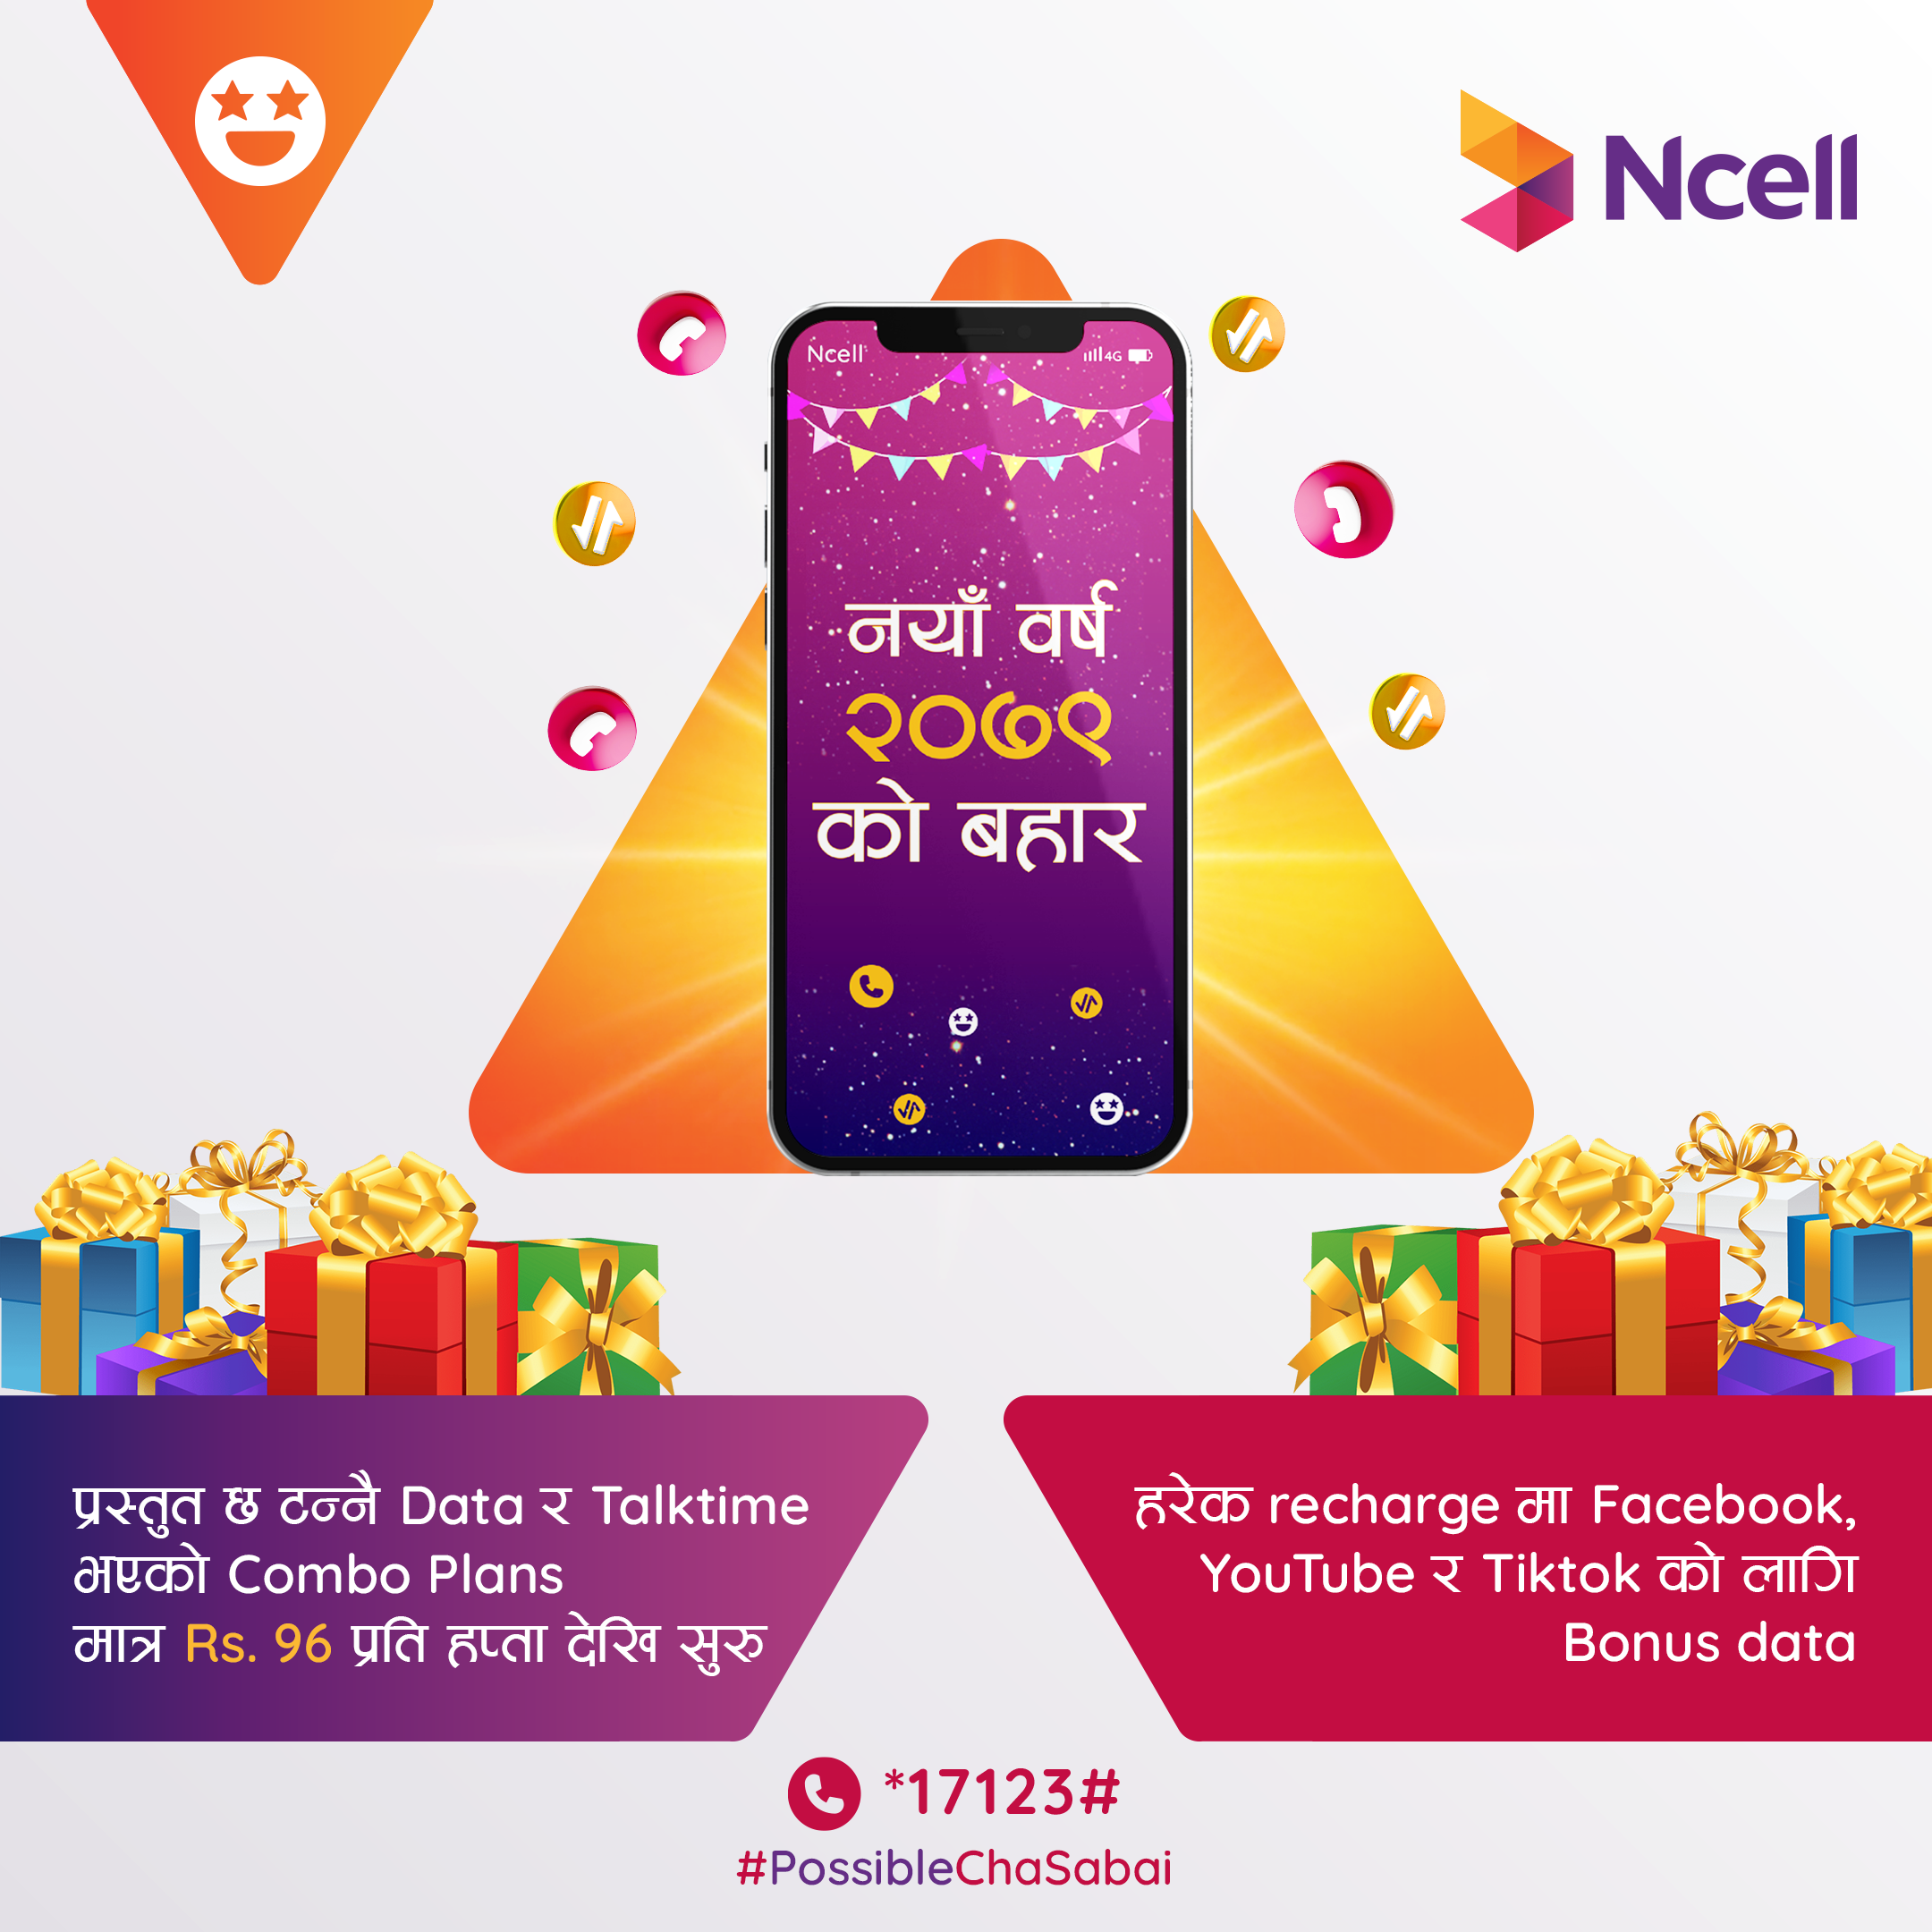 Ncell brings attractive New Year Offers